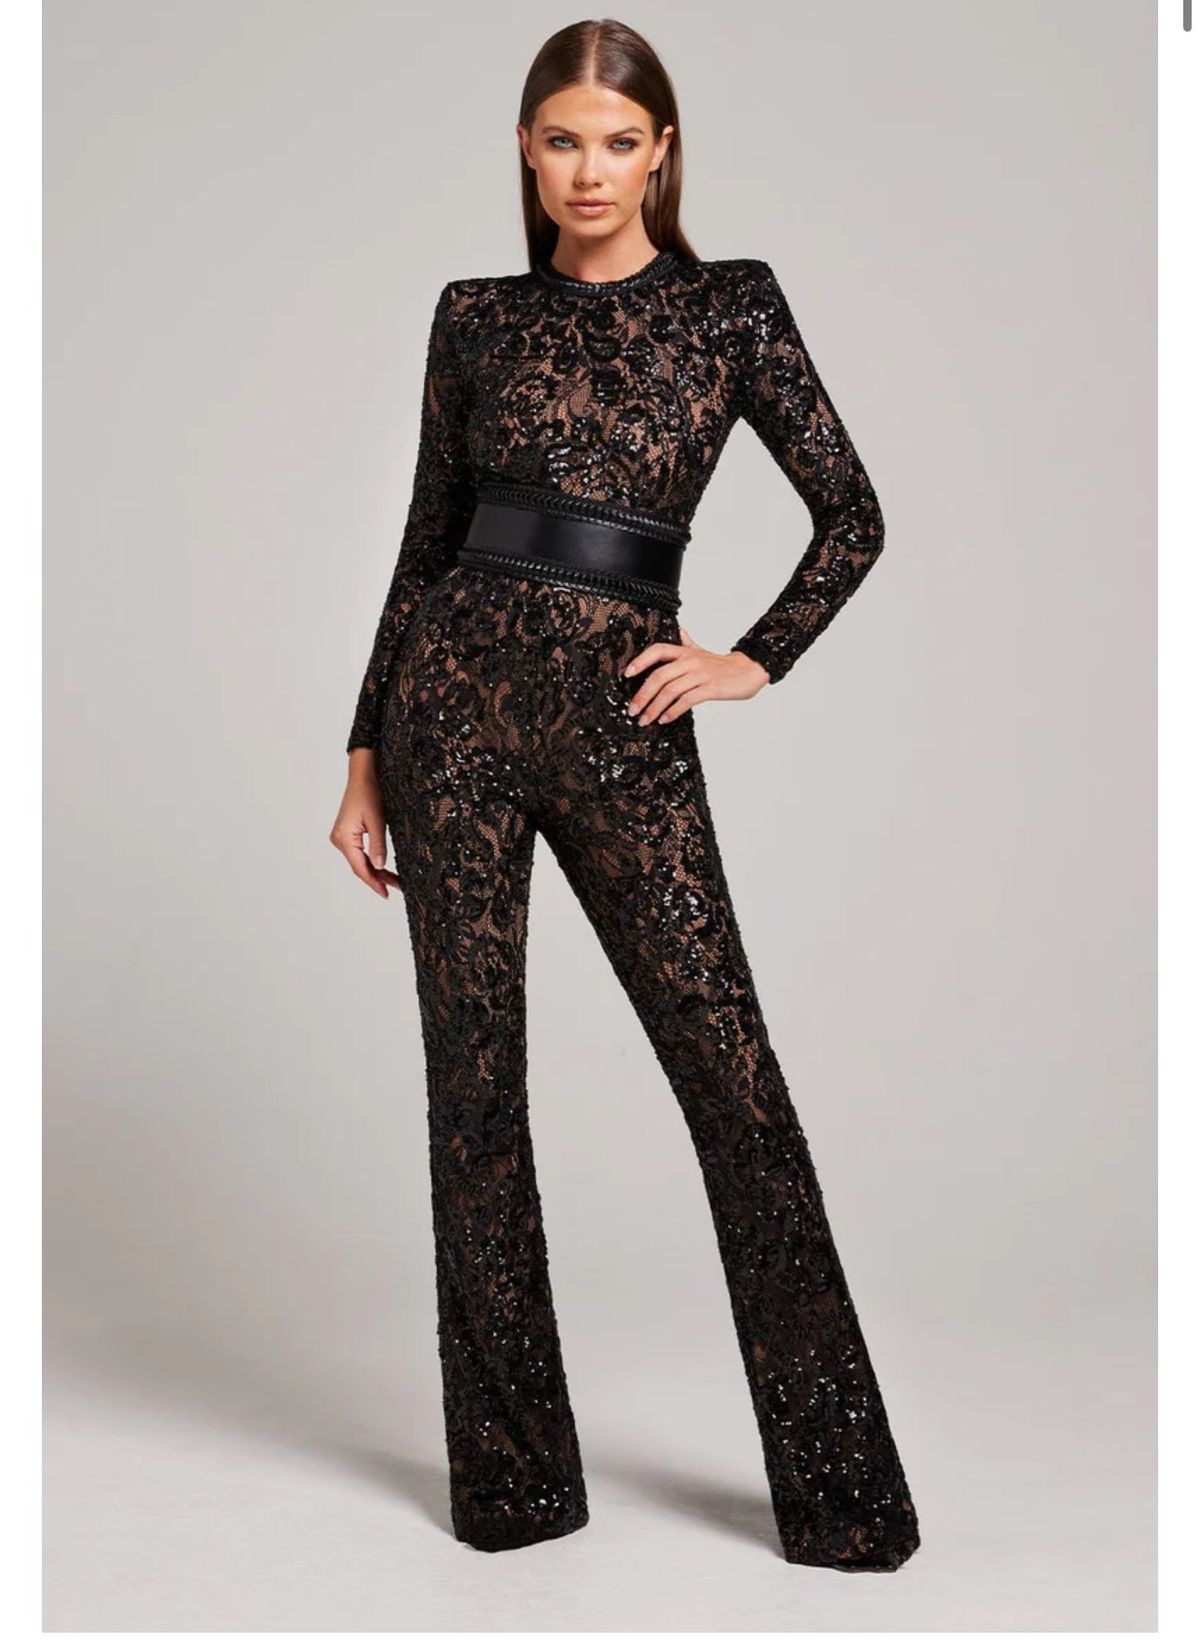 Nadine merabi Size M Homecoming Long Sleeve Lace Black Formal Jumpsuit on Queenly